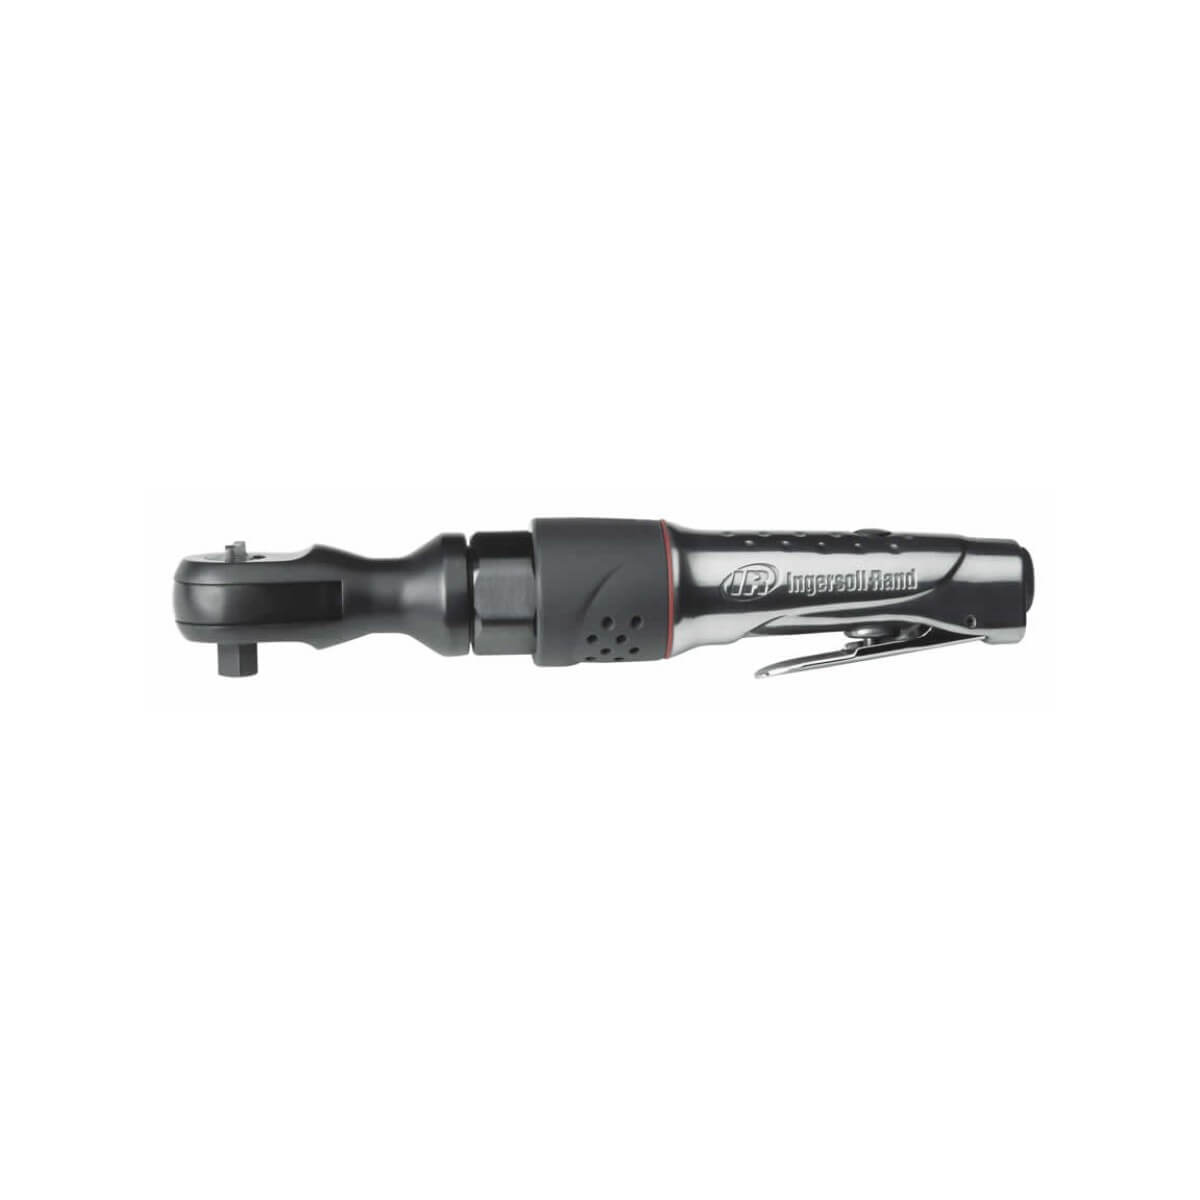 Ingersoll Rand 107XPA 3/8-inch Air Ratchet - wise-line-tools